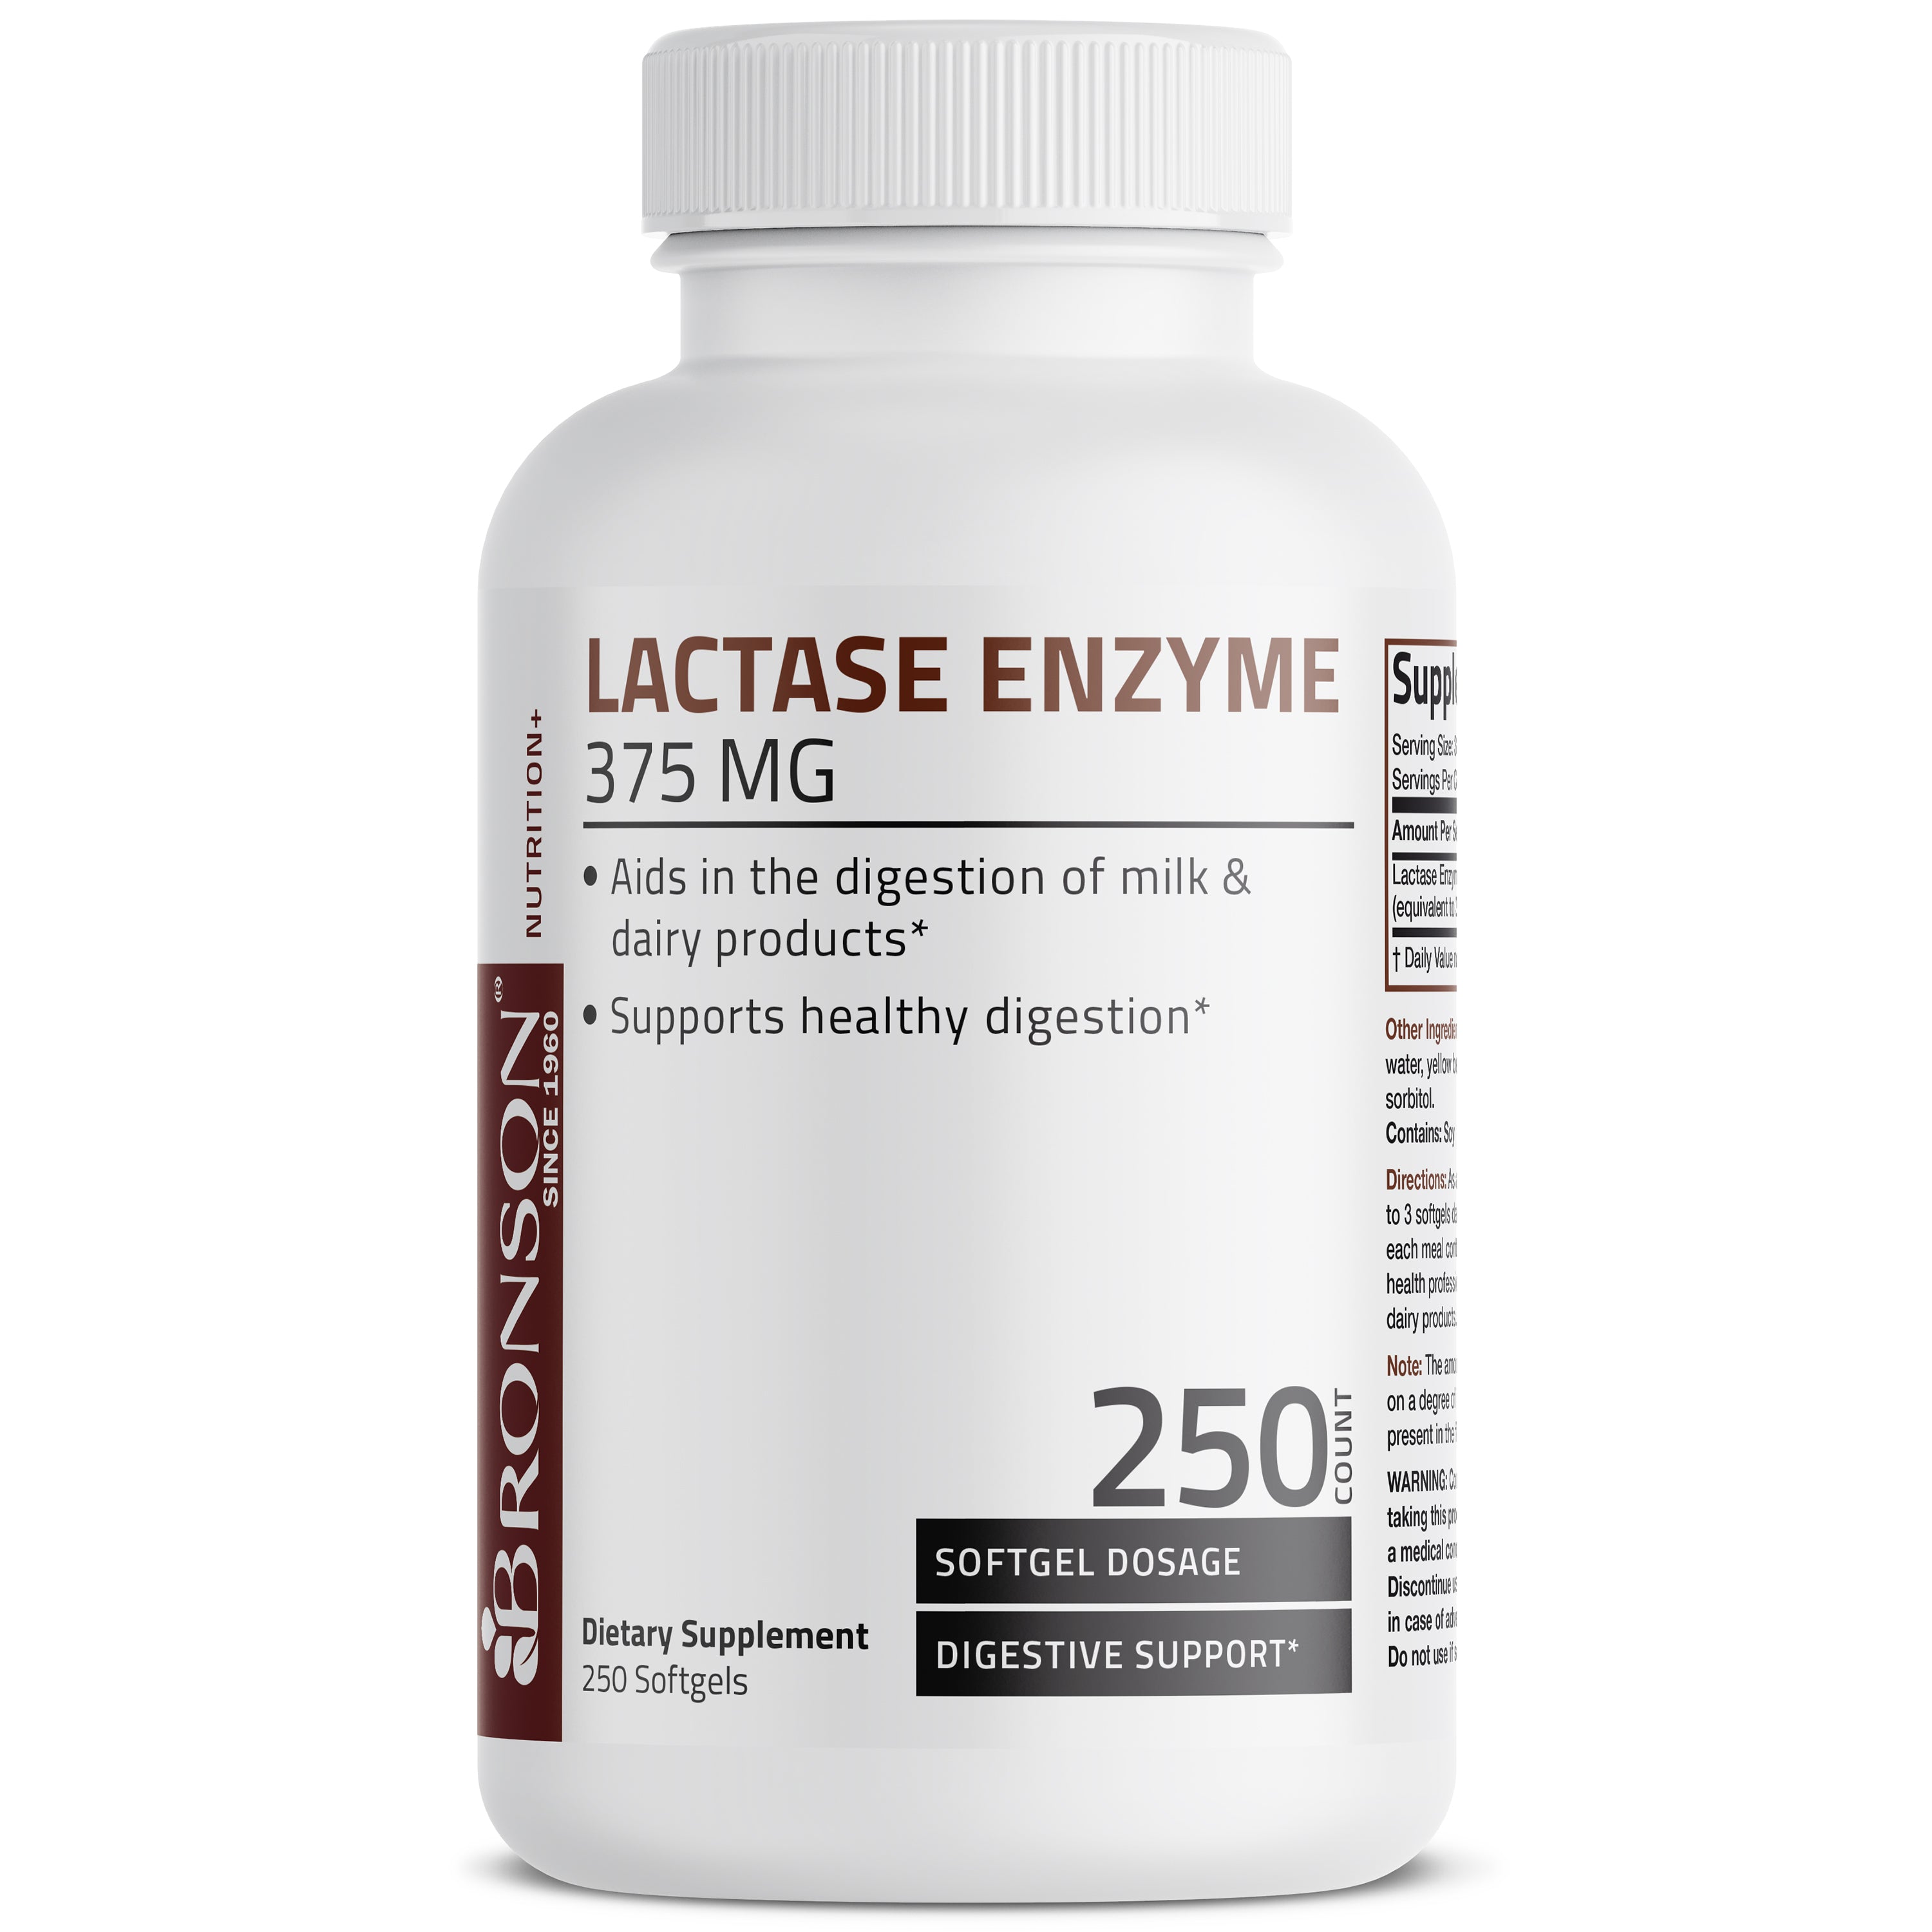 Lactase Digestive Enzyme - 375 mg - 250 Softgels view 1 of 4